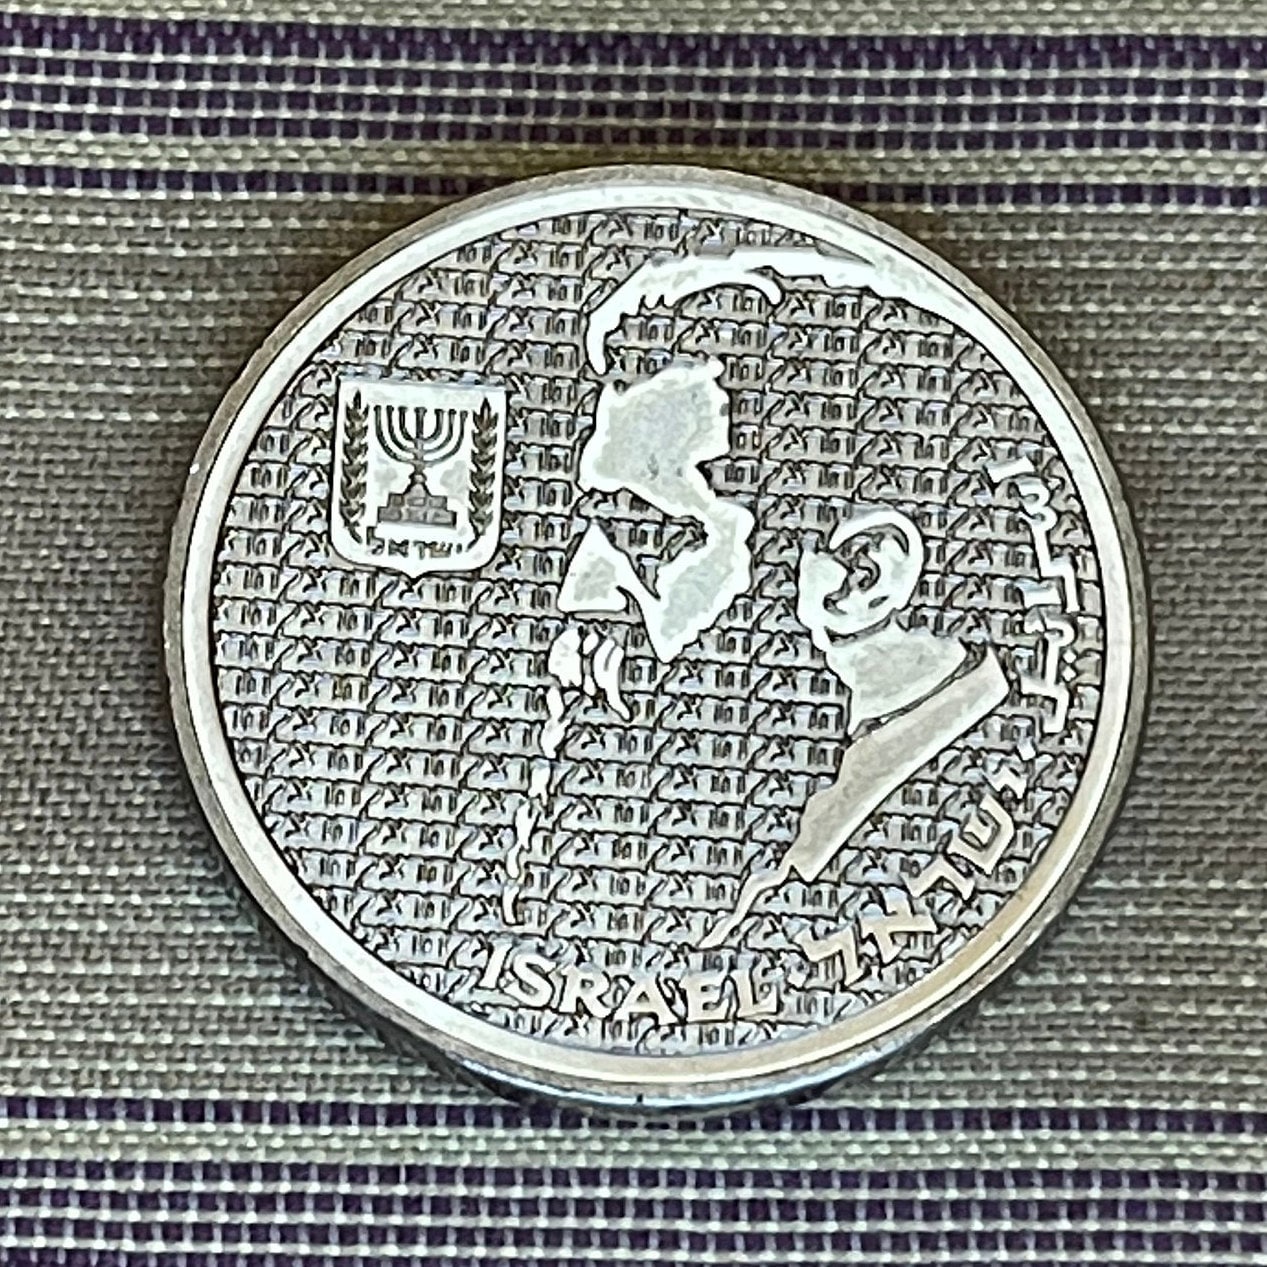 Theodor Herzl 10 Shequalim Israel Authentic Coin Money for Jewelry and Craft Making (Father of Israel) (Zionism) 1984